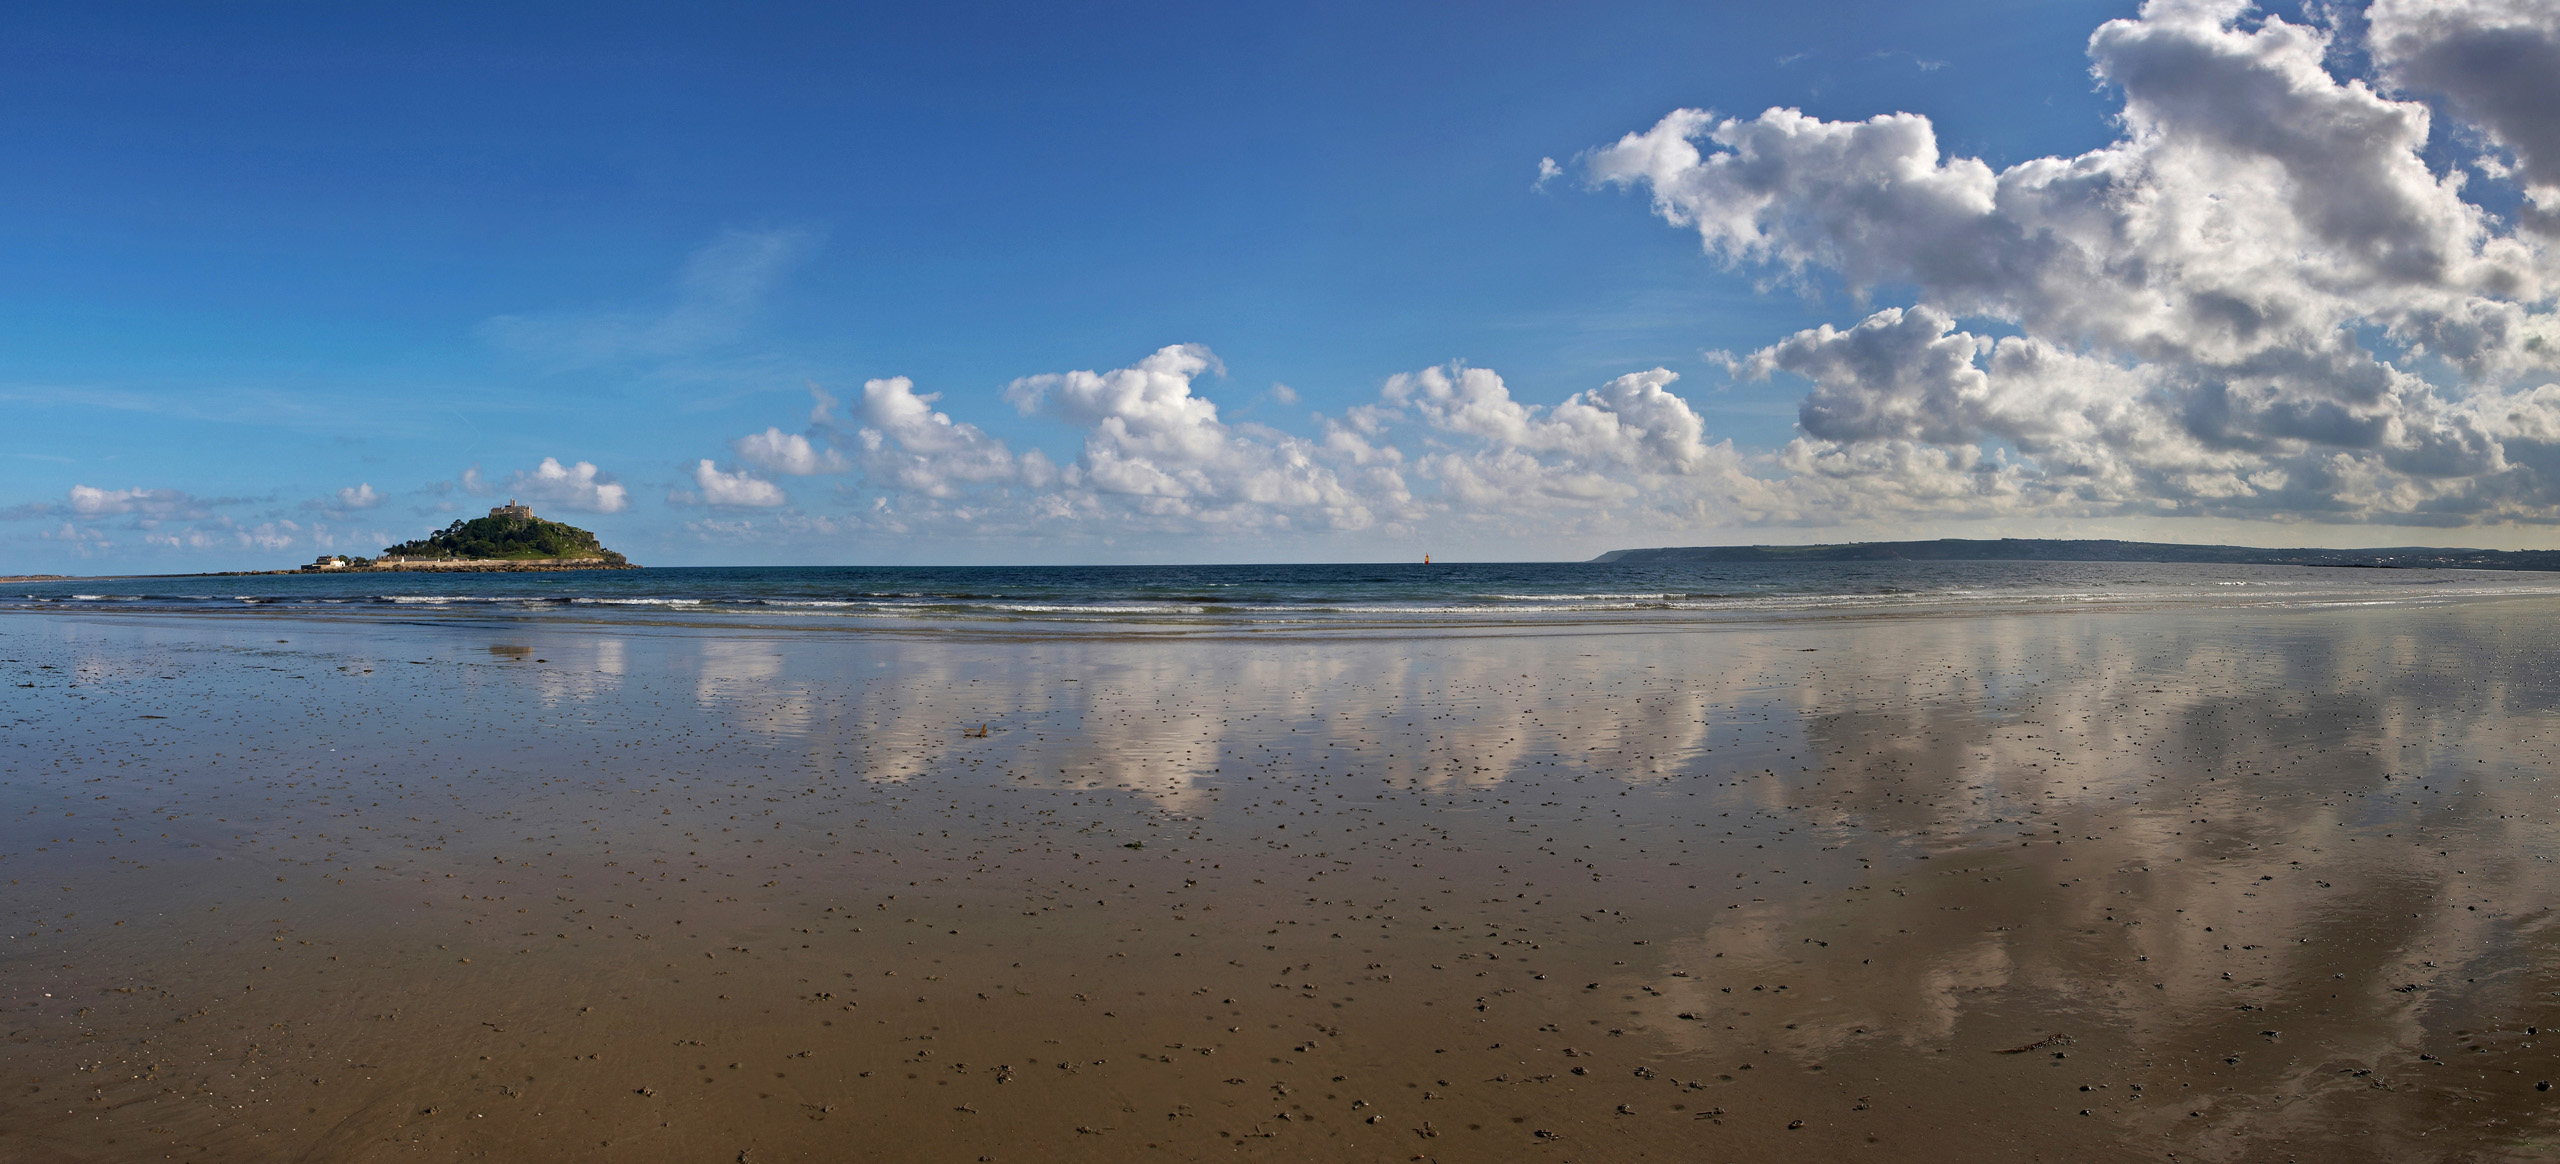 Marazion and St Michael's Mount Ultra Wide Panorama